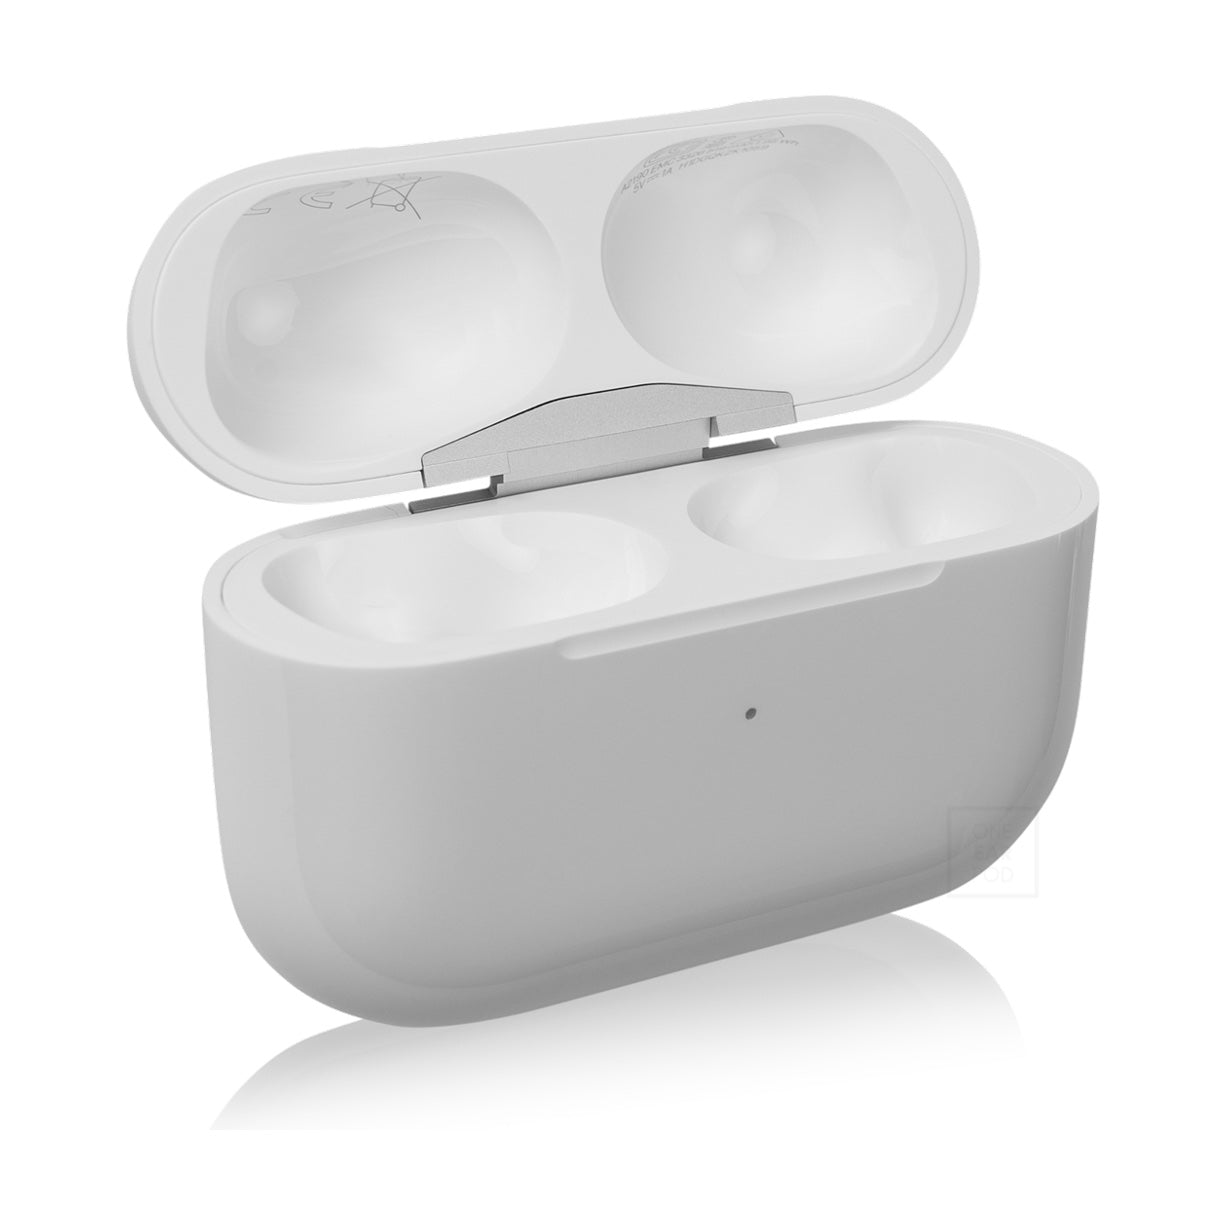 Apple AirPods Pro case replacement |